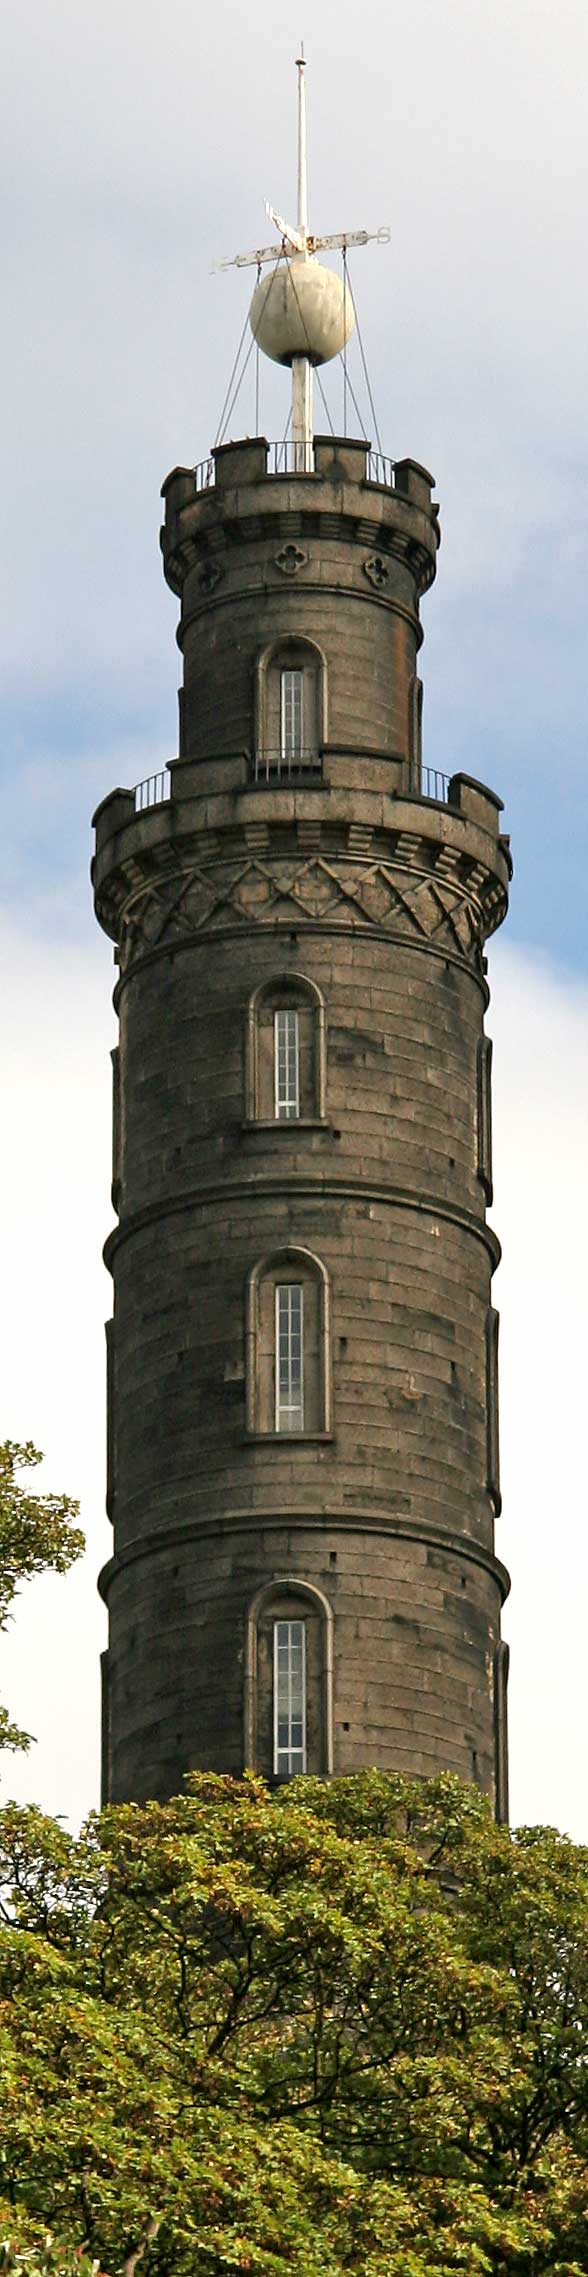 The Nelson Monument on Calton Hill.  The time ball photographed at 11.59pm on October 2, 2006  -  waiting to be lowered at 1pm